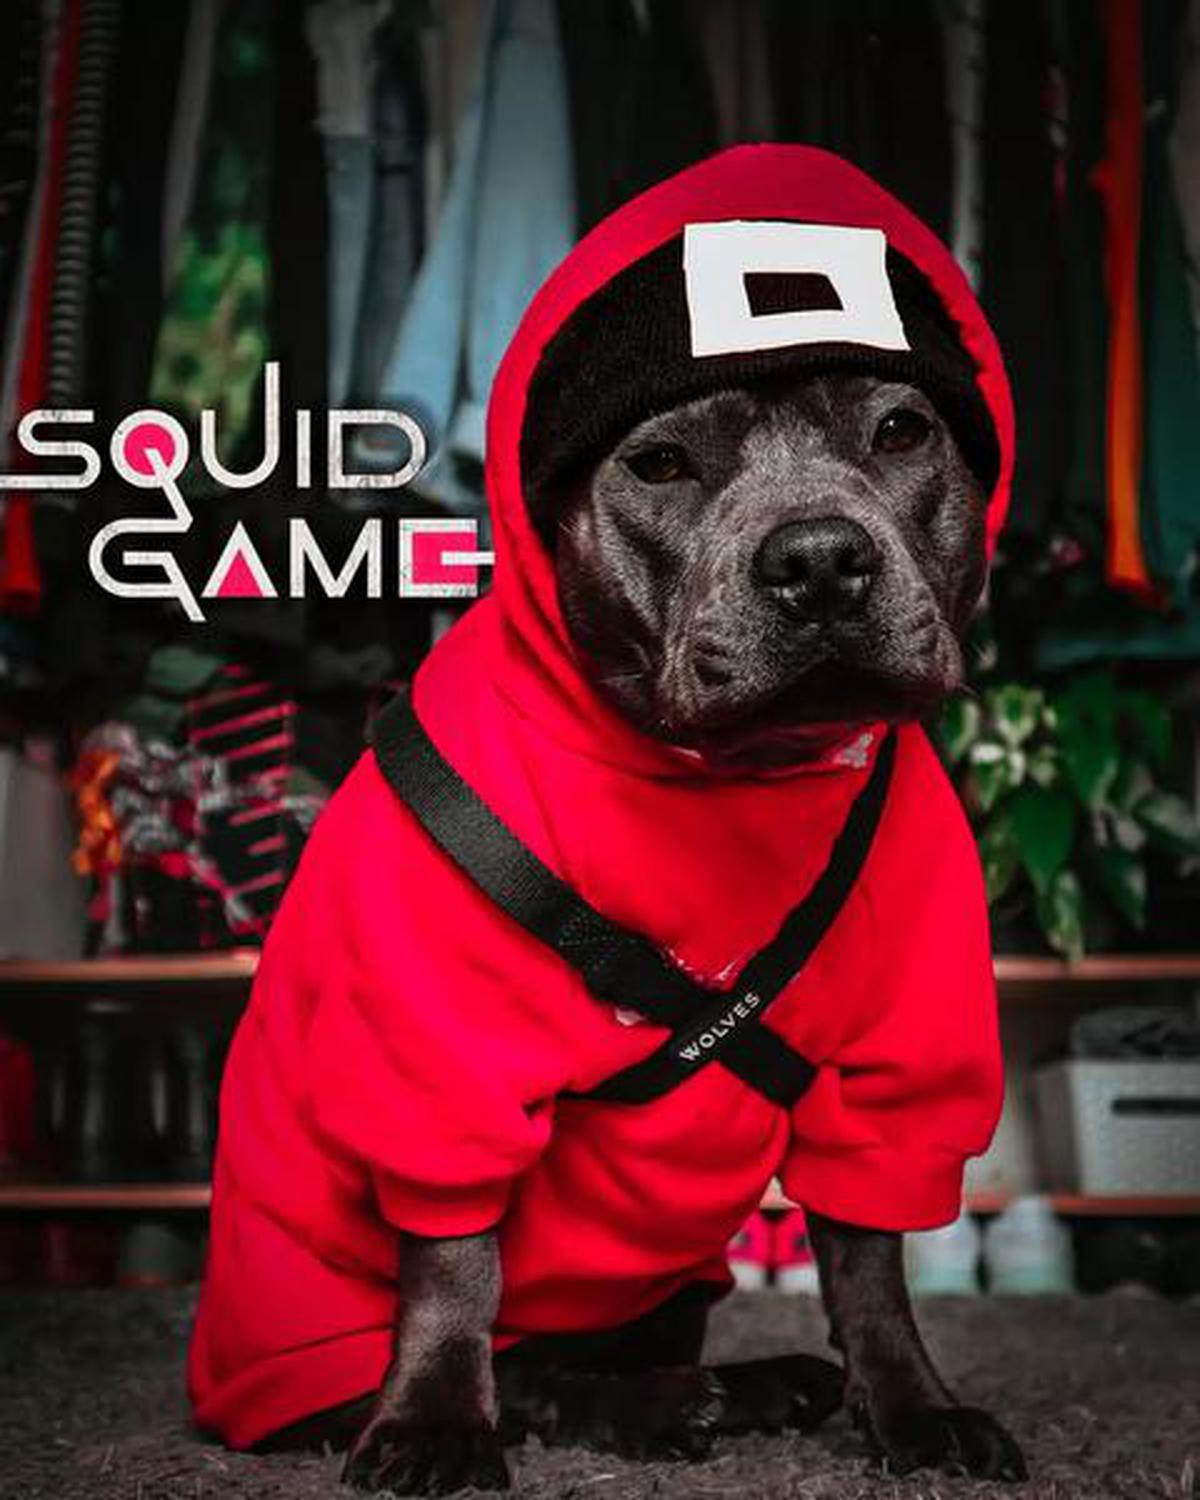 New Zealand-based Pania, a staffy dressed as a ‘Squid Game’ guard